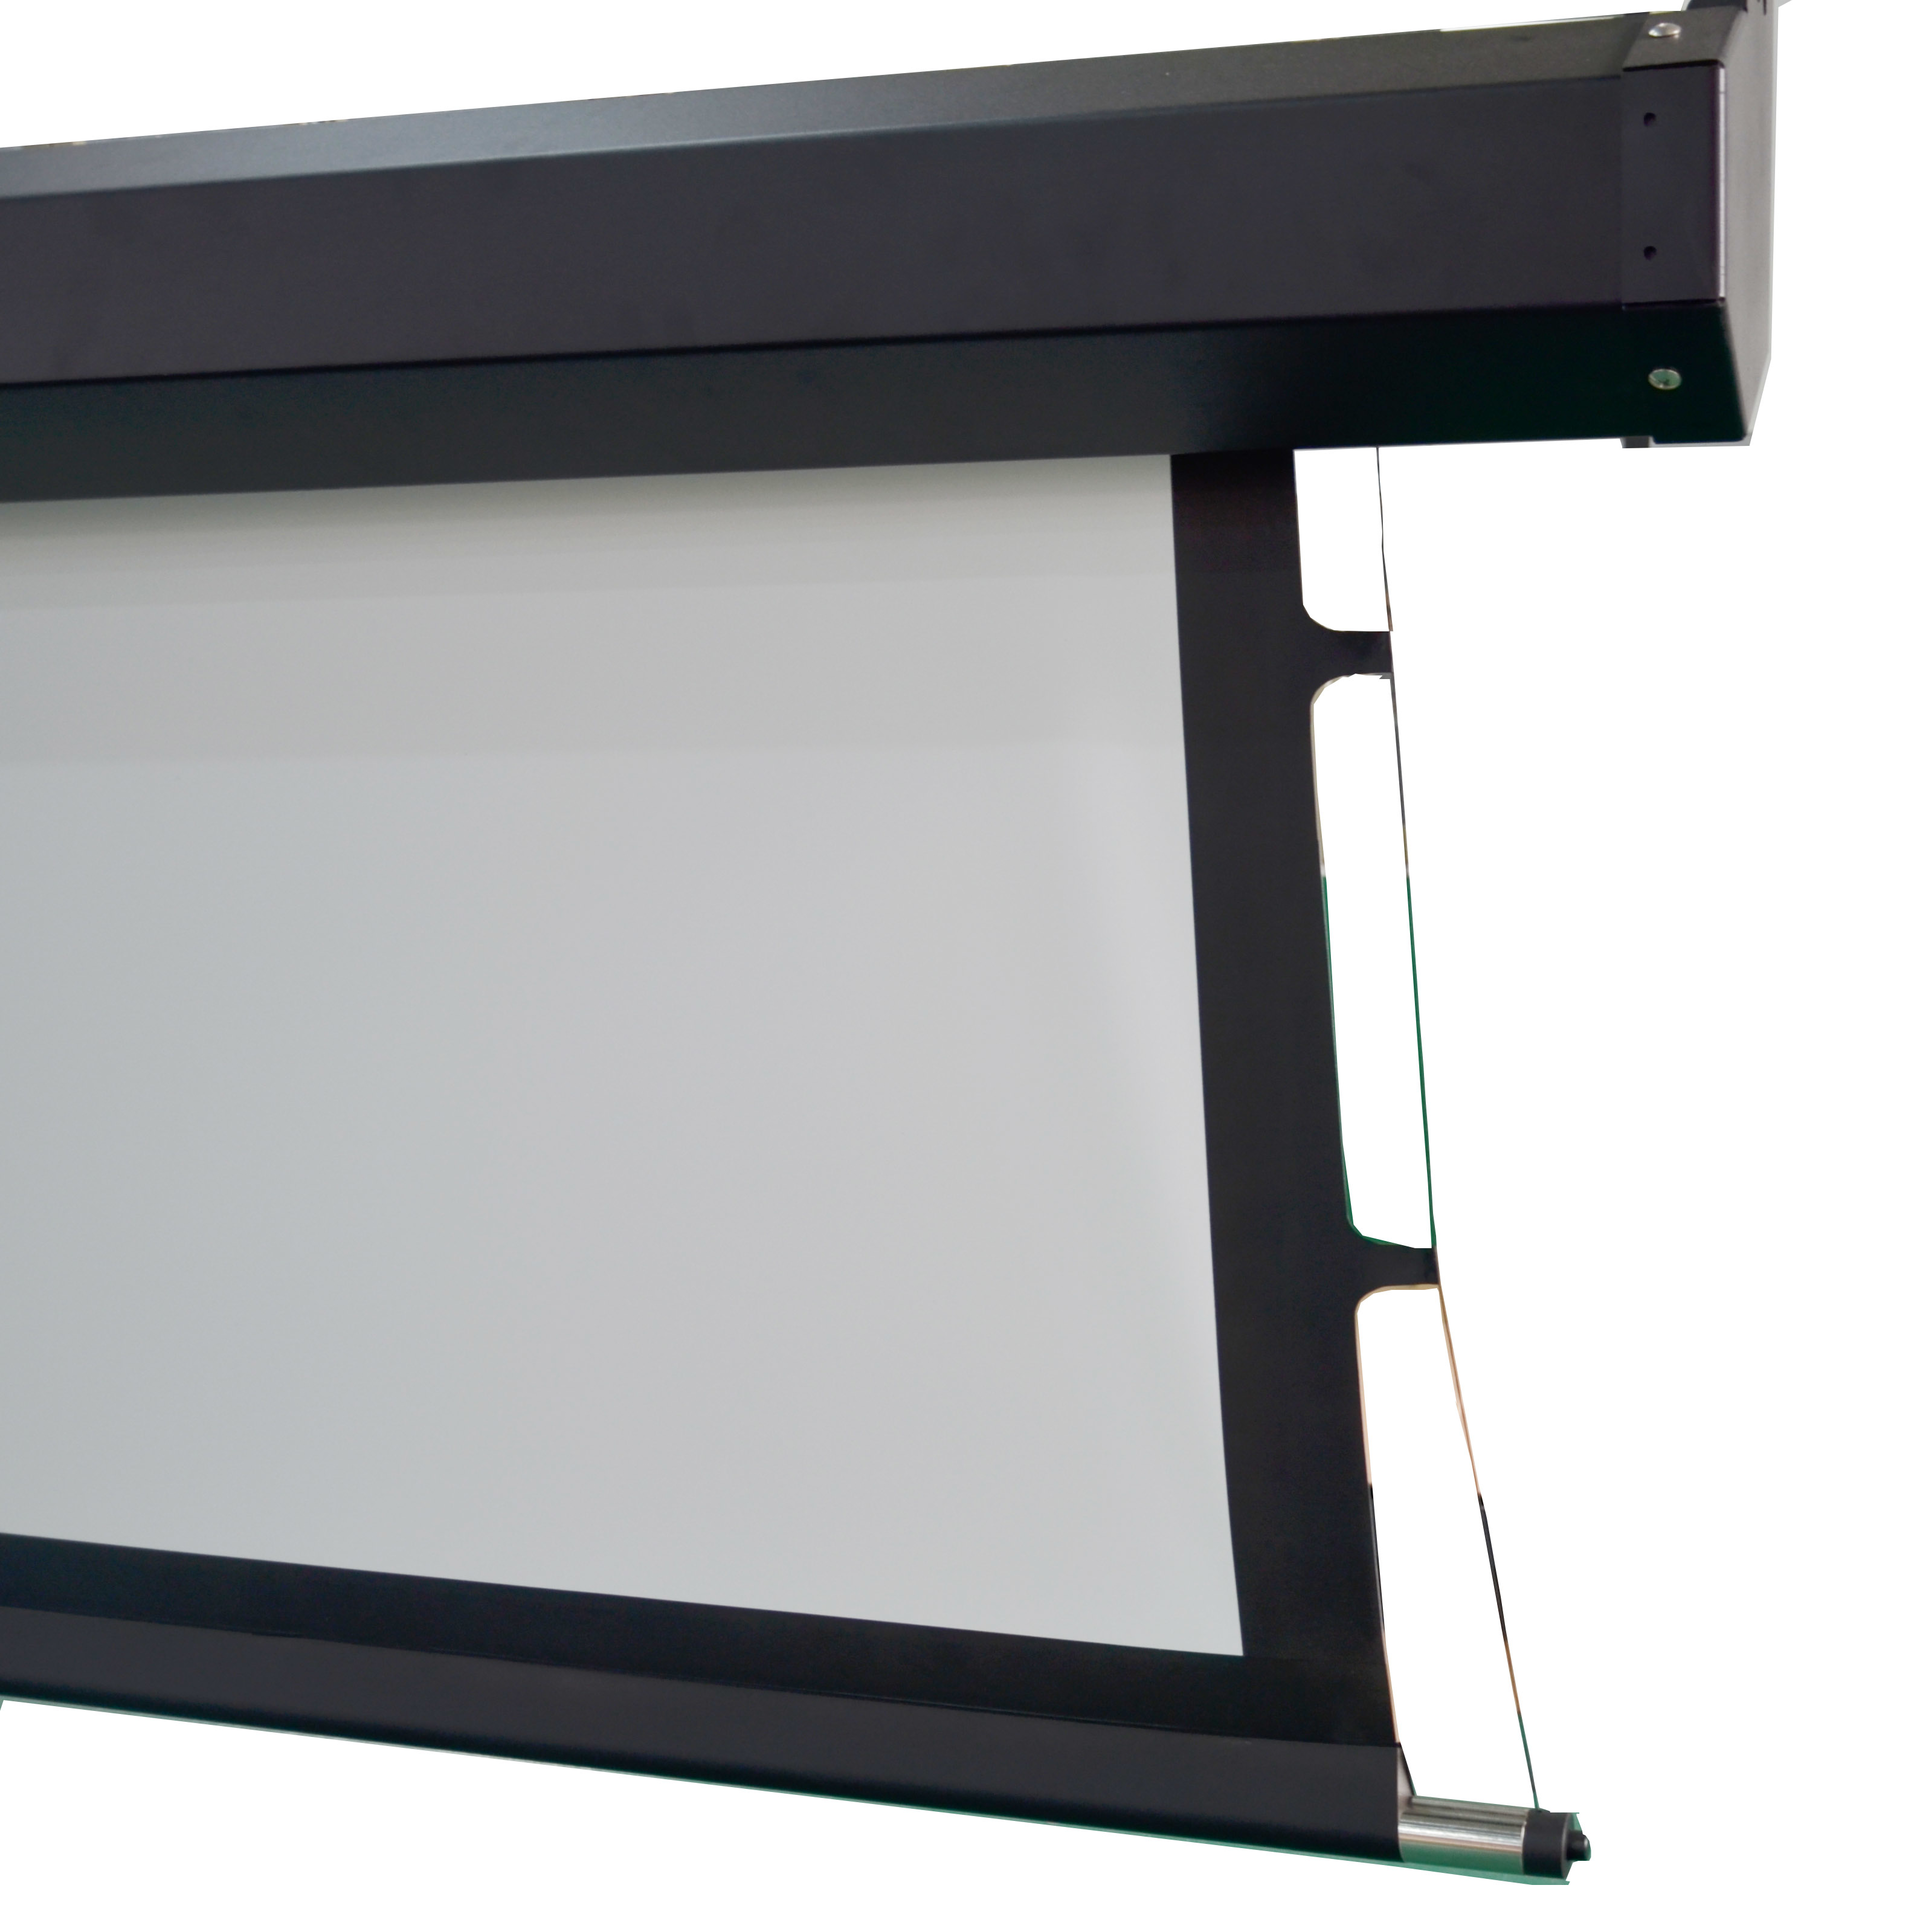 XY Screens motorized home movie projector screen for computer